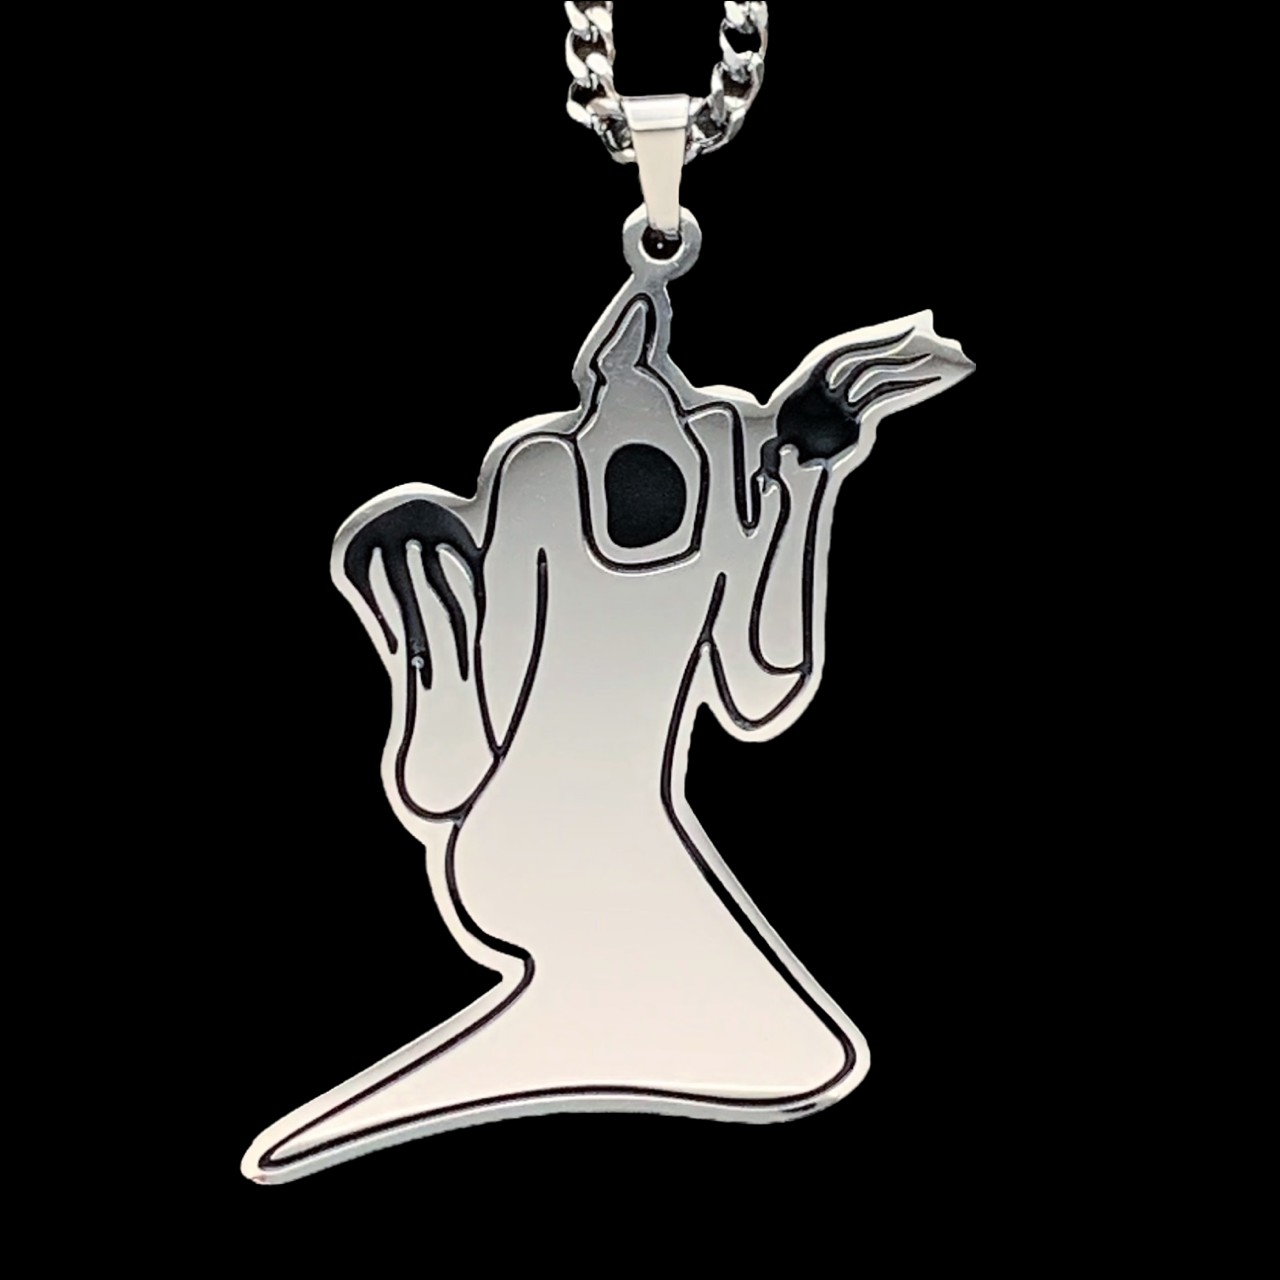 GHOSTEMANE' Necklace – Jewelry Designs by ACE ™